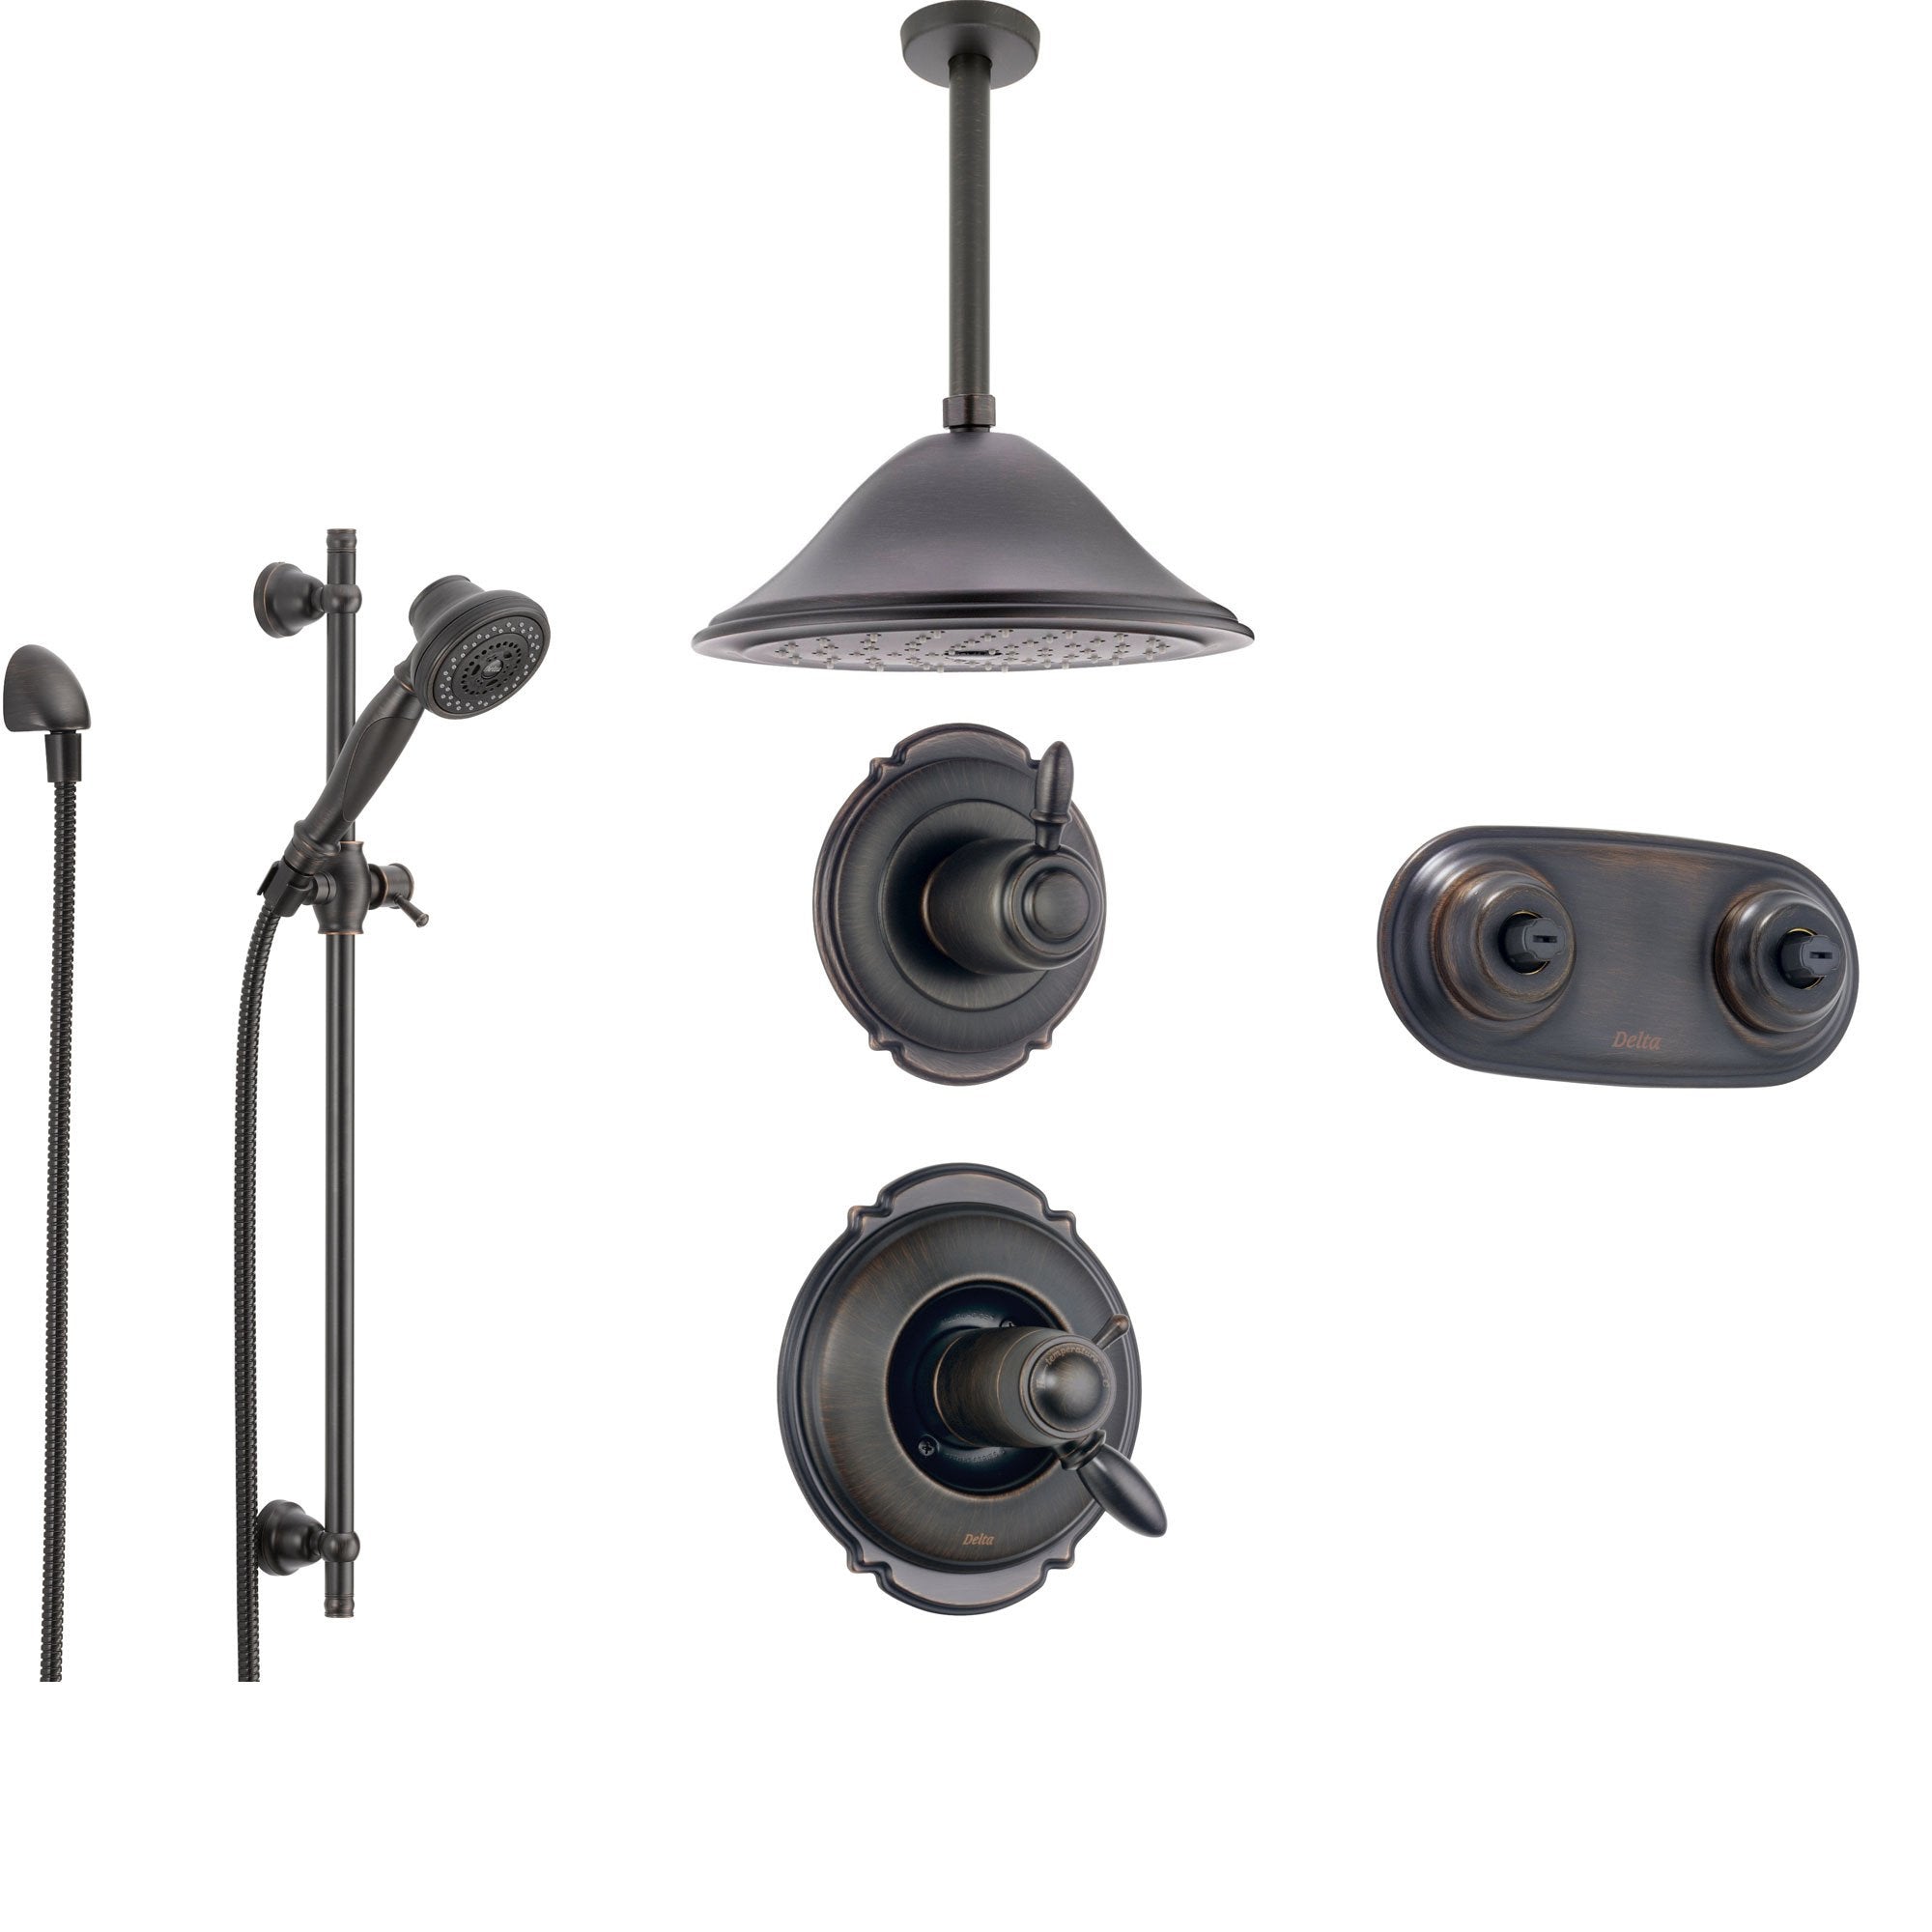 Delta Victorian Venetian Bronze Shower System with Thermostatic Shower Handle, 6-setting Diverter, Large Ceiling Mount Showerhead, Handheld Shower, and Dual Body Spray Plate SS17T5593RB